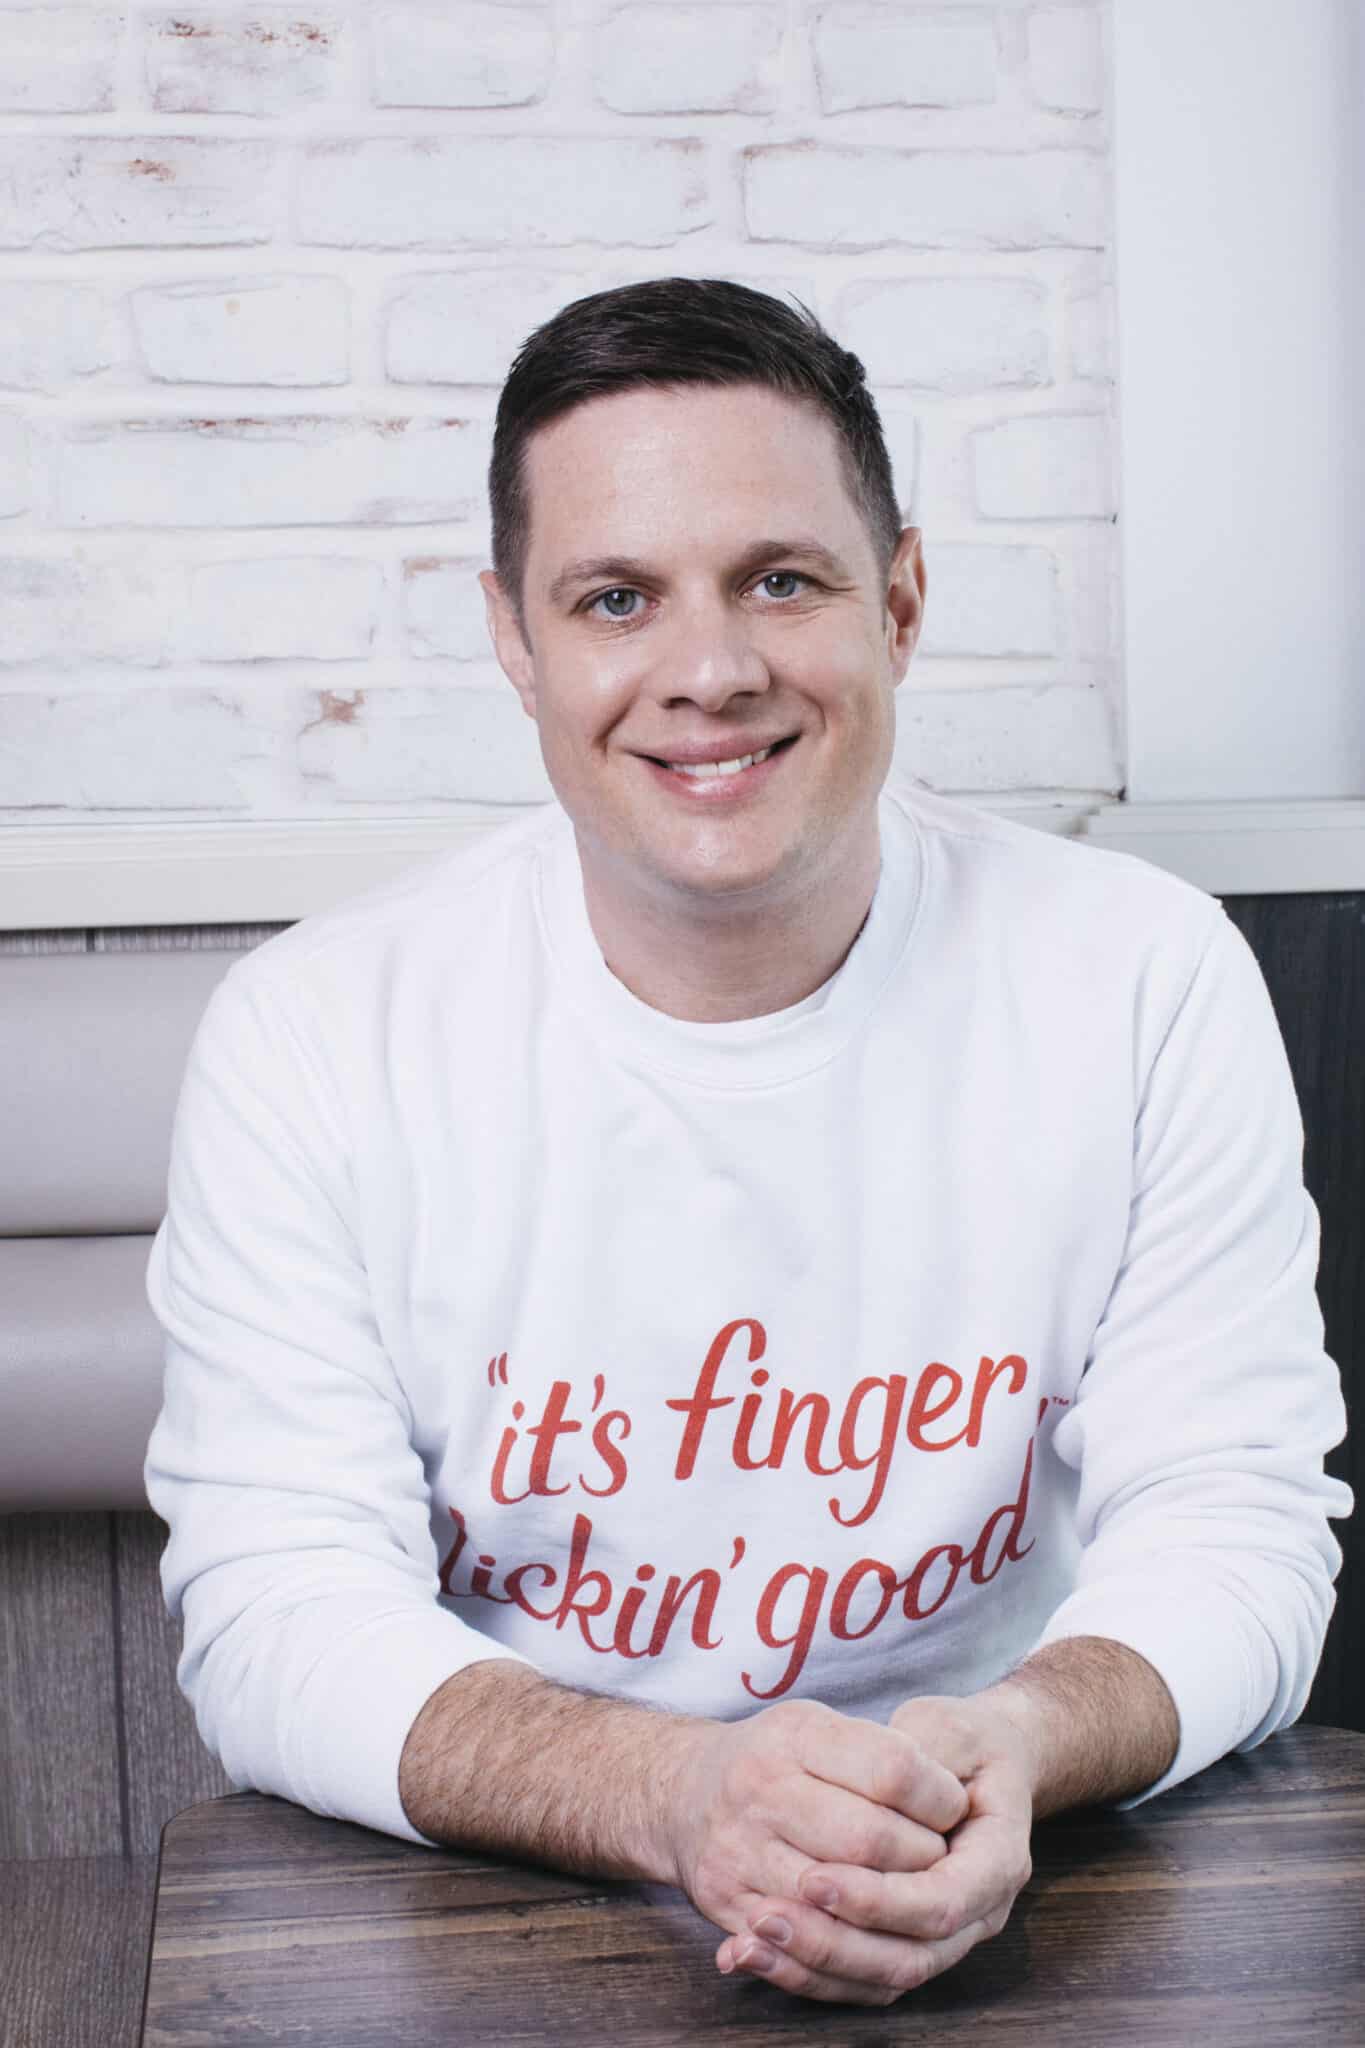 KFC's Neil Piper pictured wearing a sweater with the slogan "It's finger licking good". 